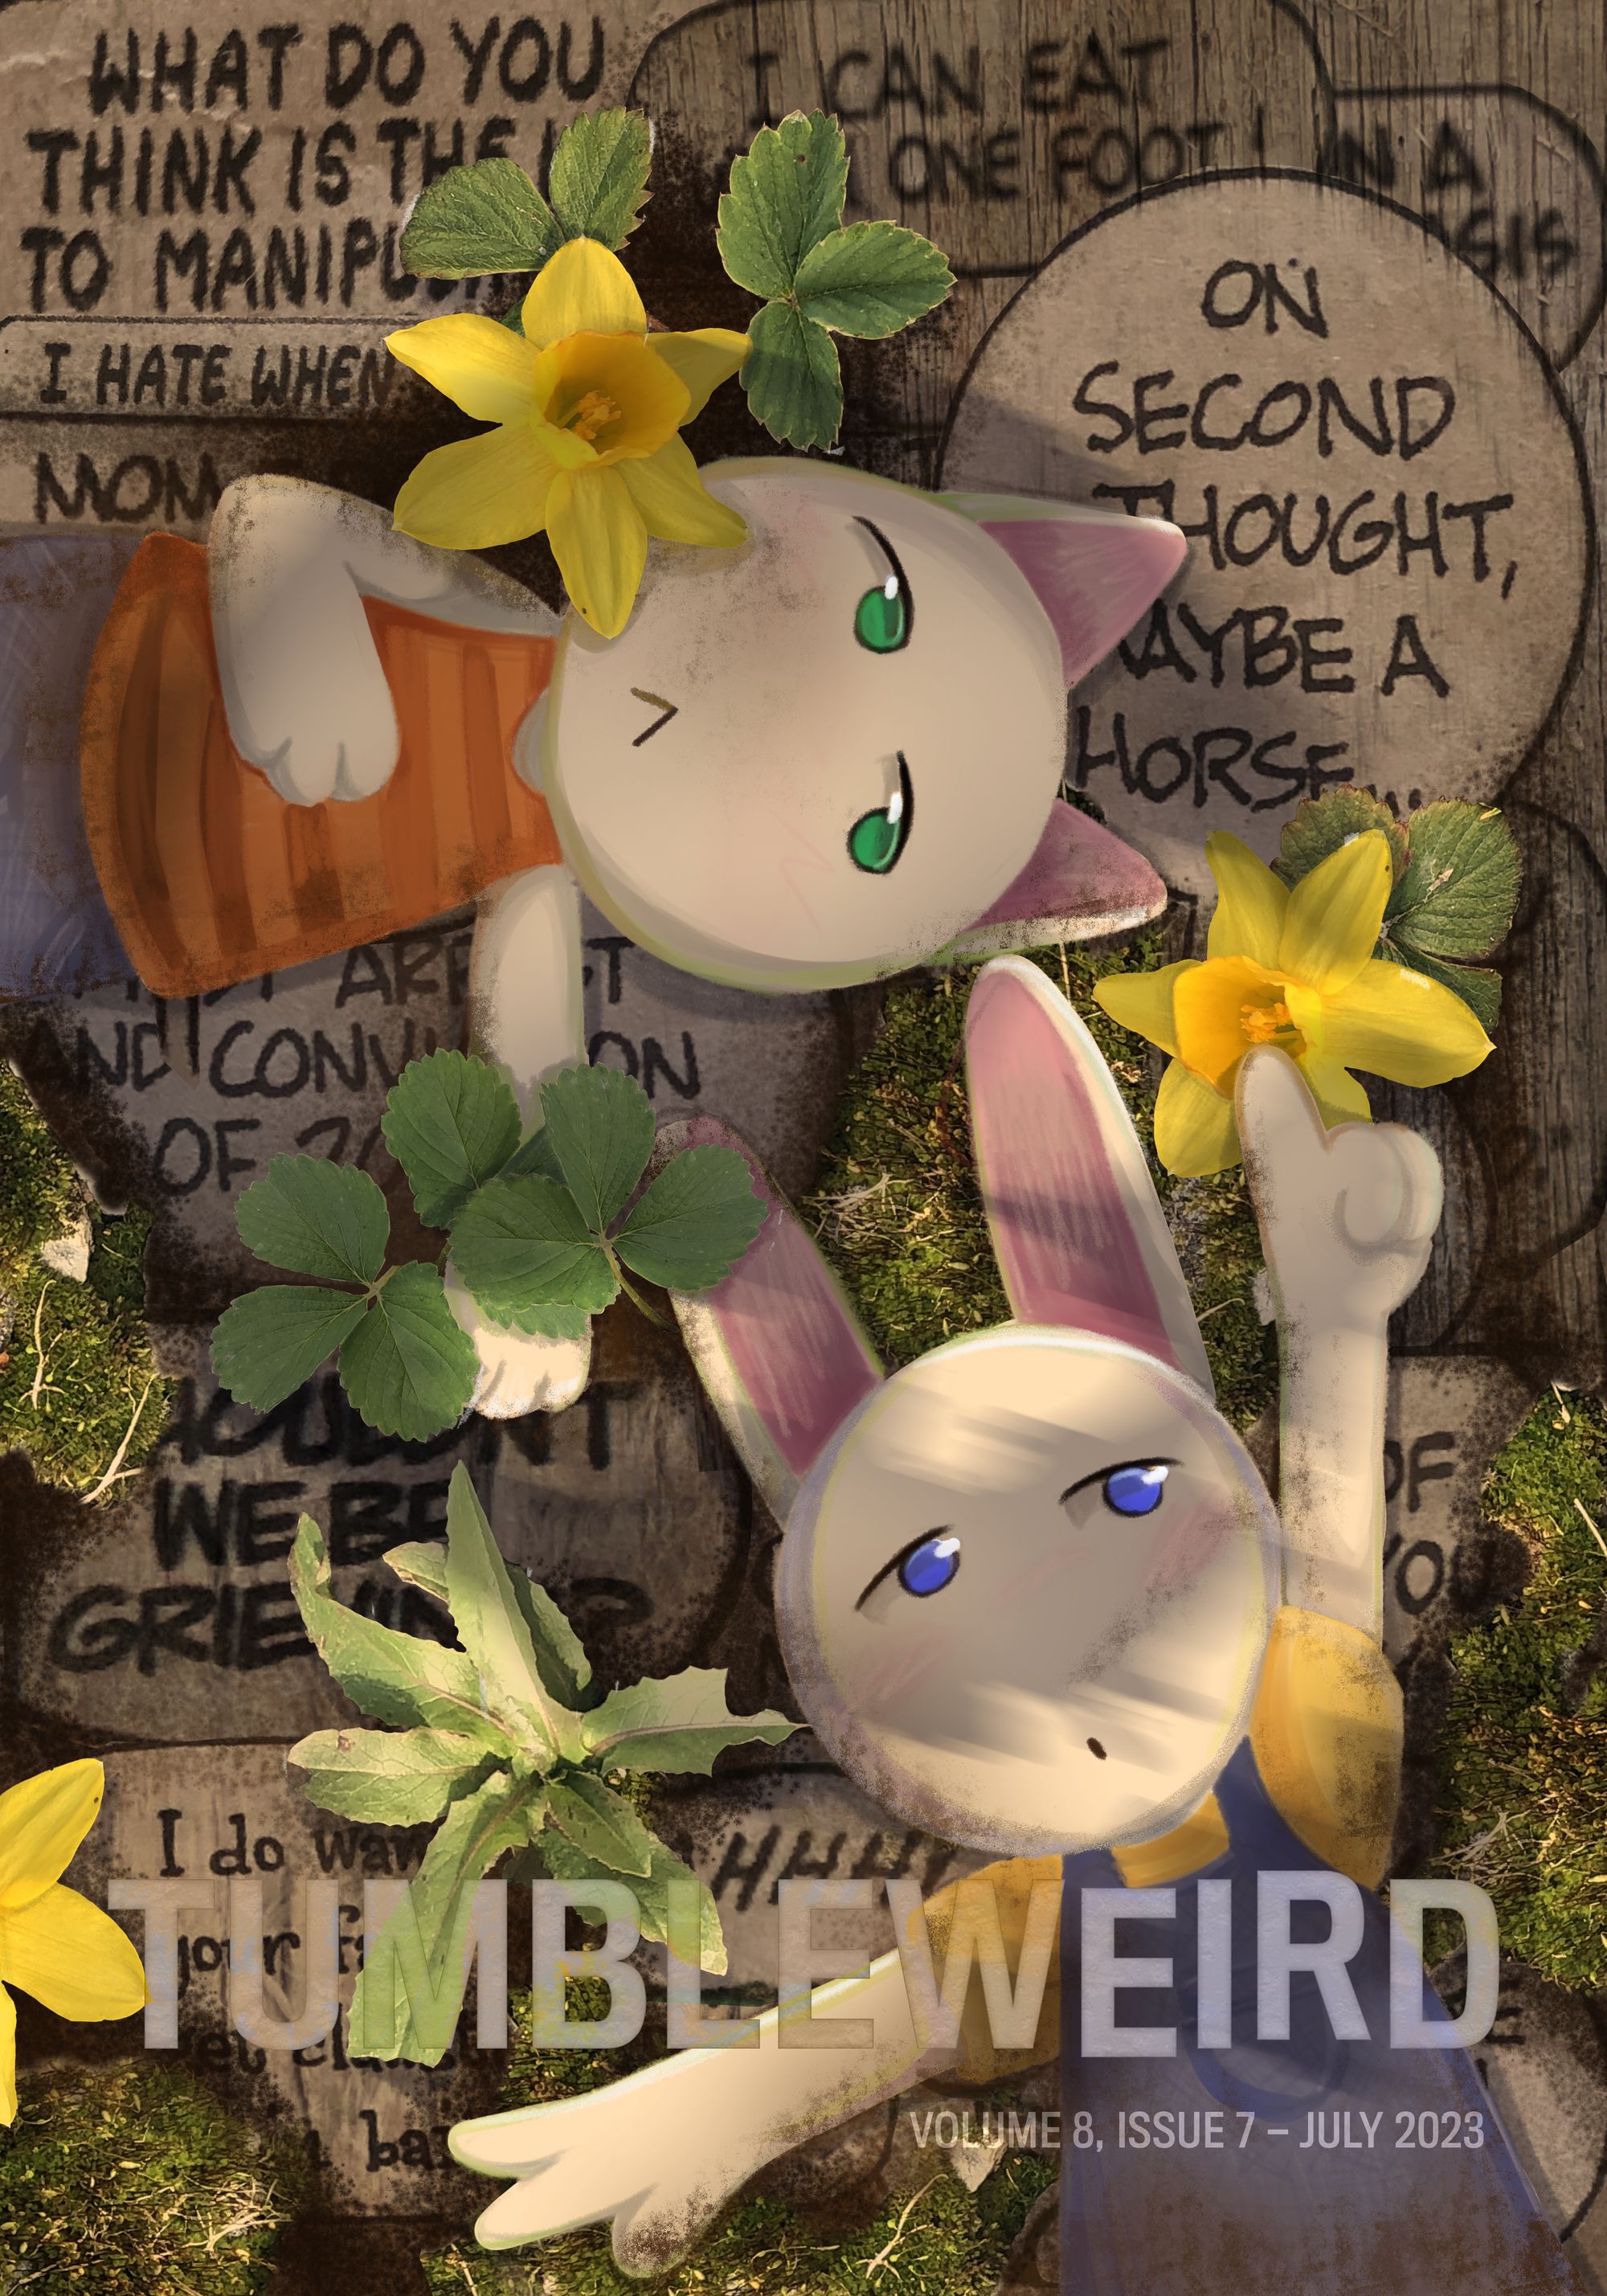 A bunny and cat laying on the ground looking at clouds. The stones under them have partially concealed text.